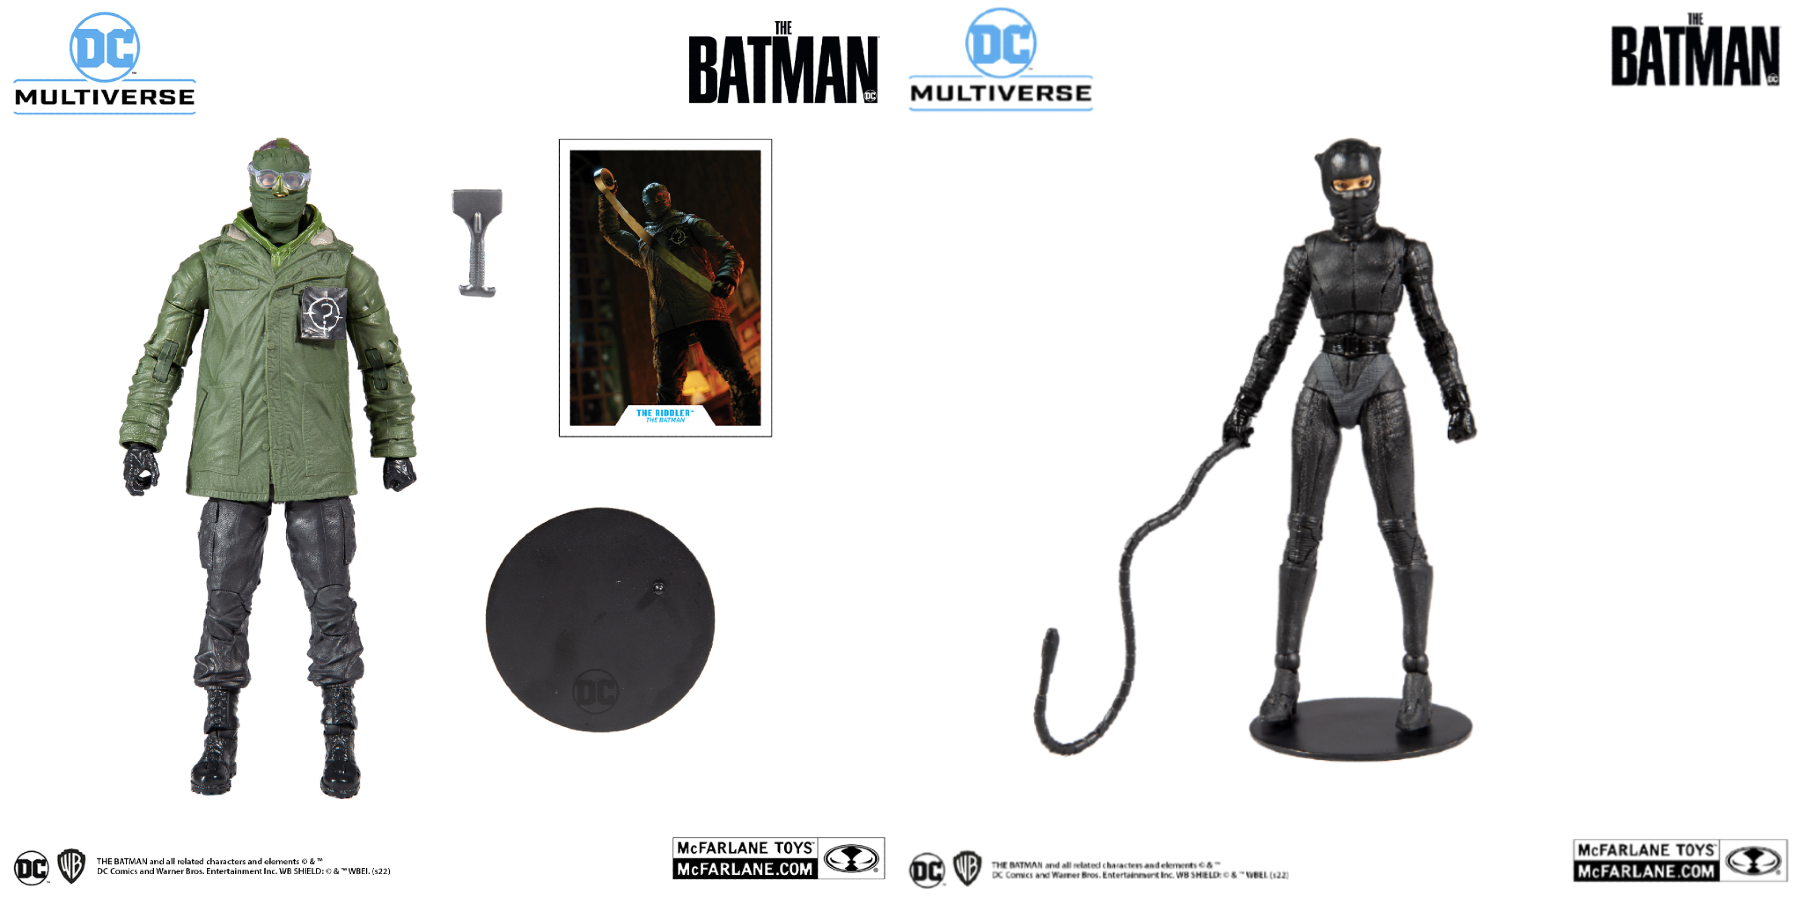 The Riddler and Catwoman figures